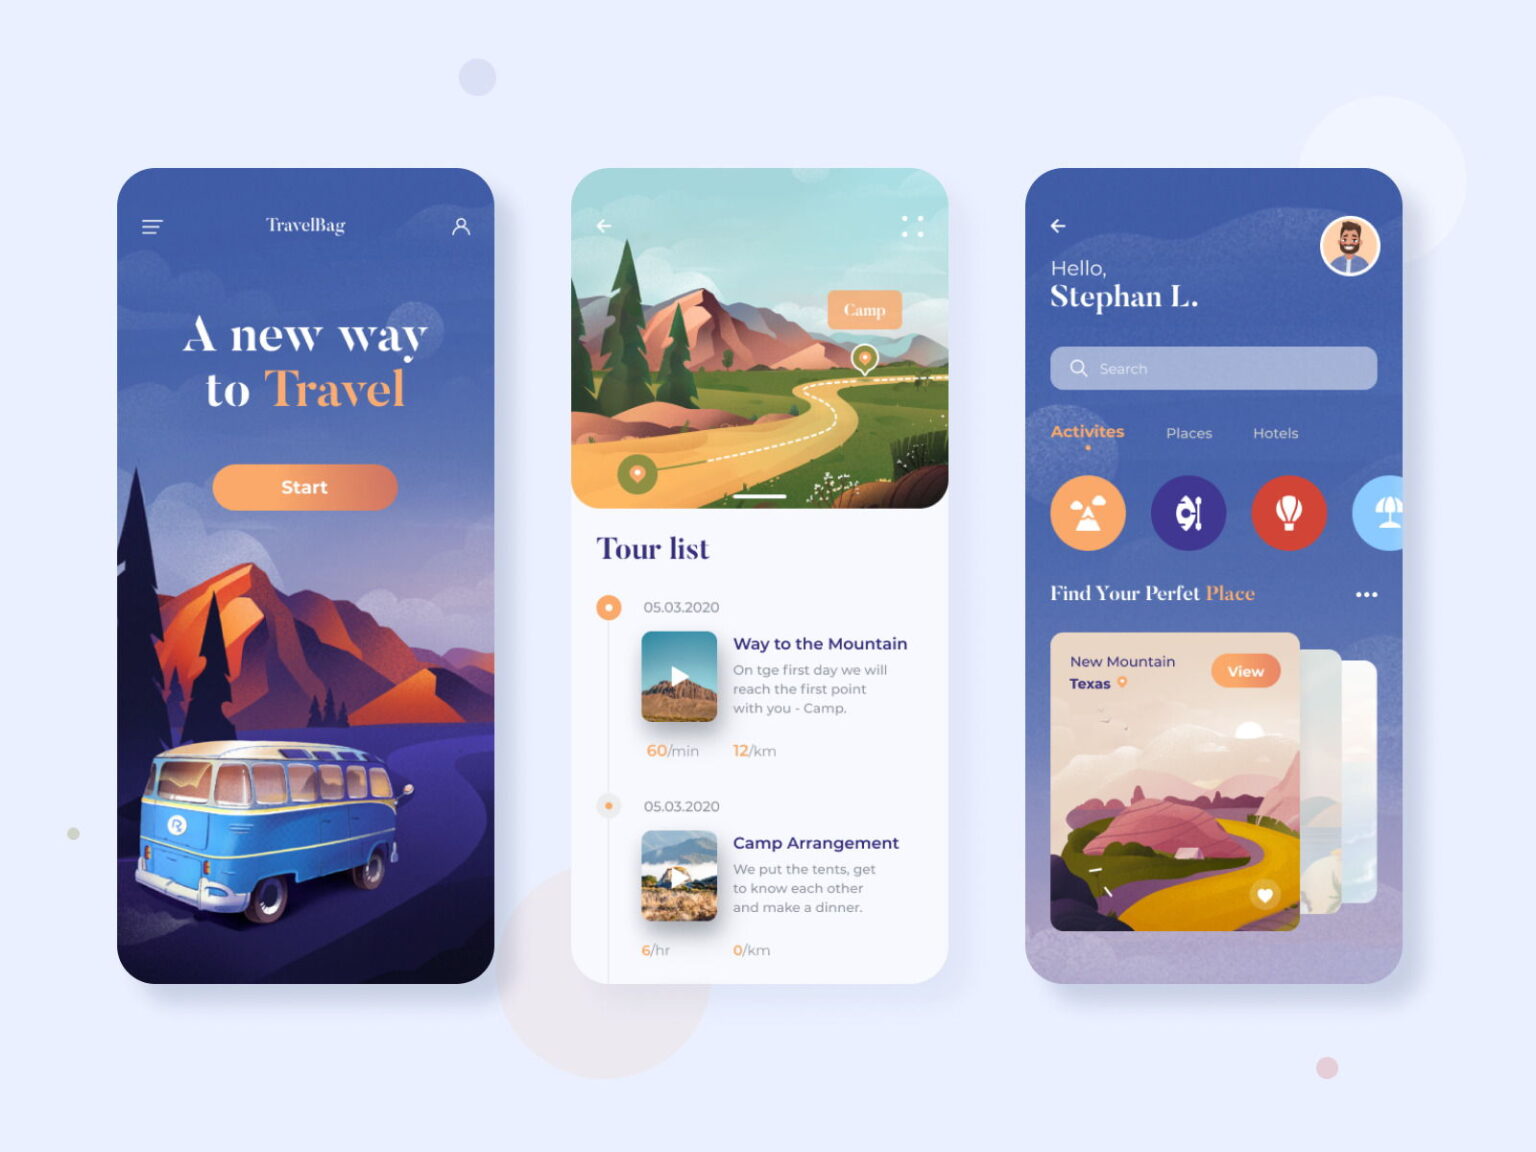 mobile app in travel and tourism